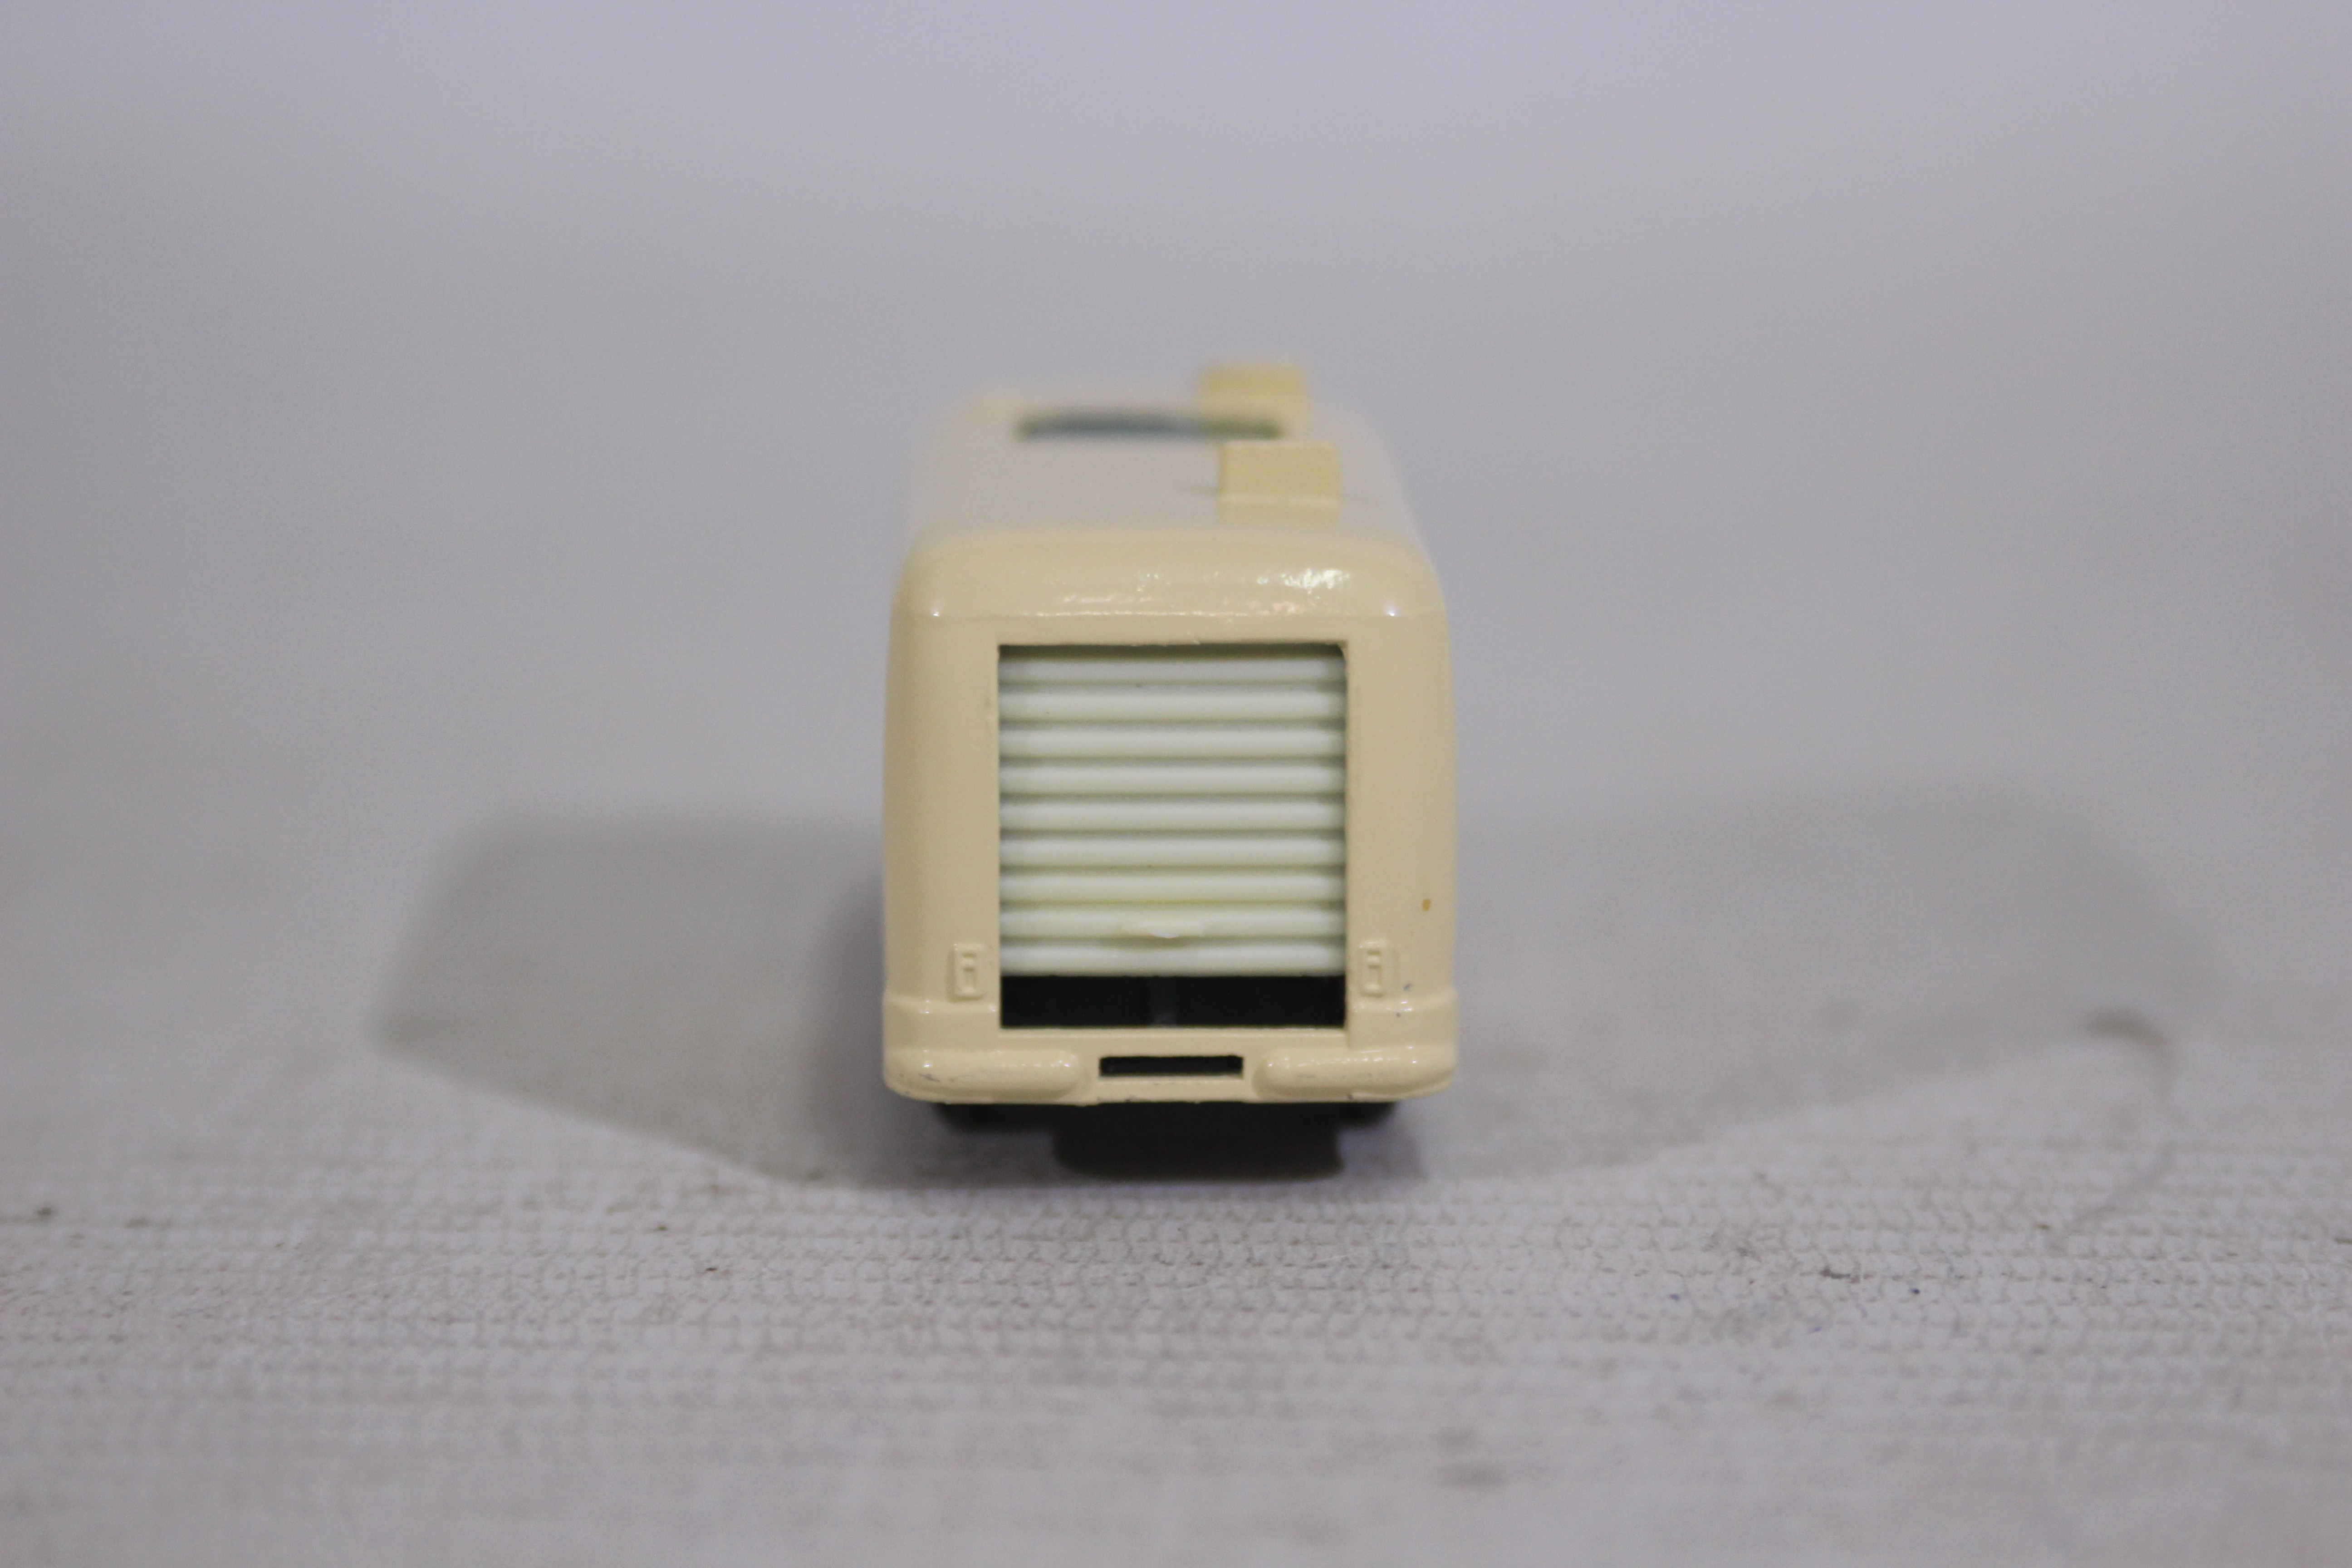 Matchbox - 2 x models, a boxed Commer TV Service van # 62 and a carded Morgan Aeromax # T9299-0818. - Image 4 of 6